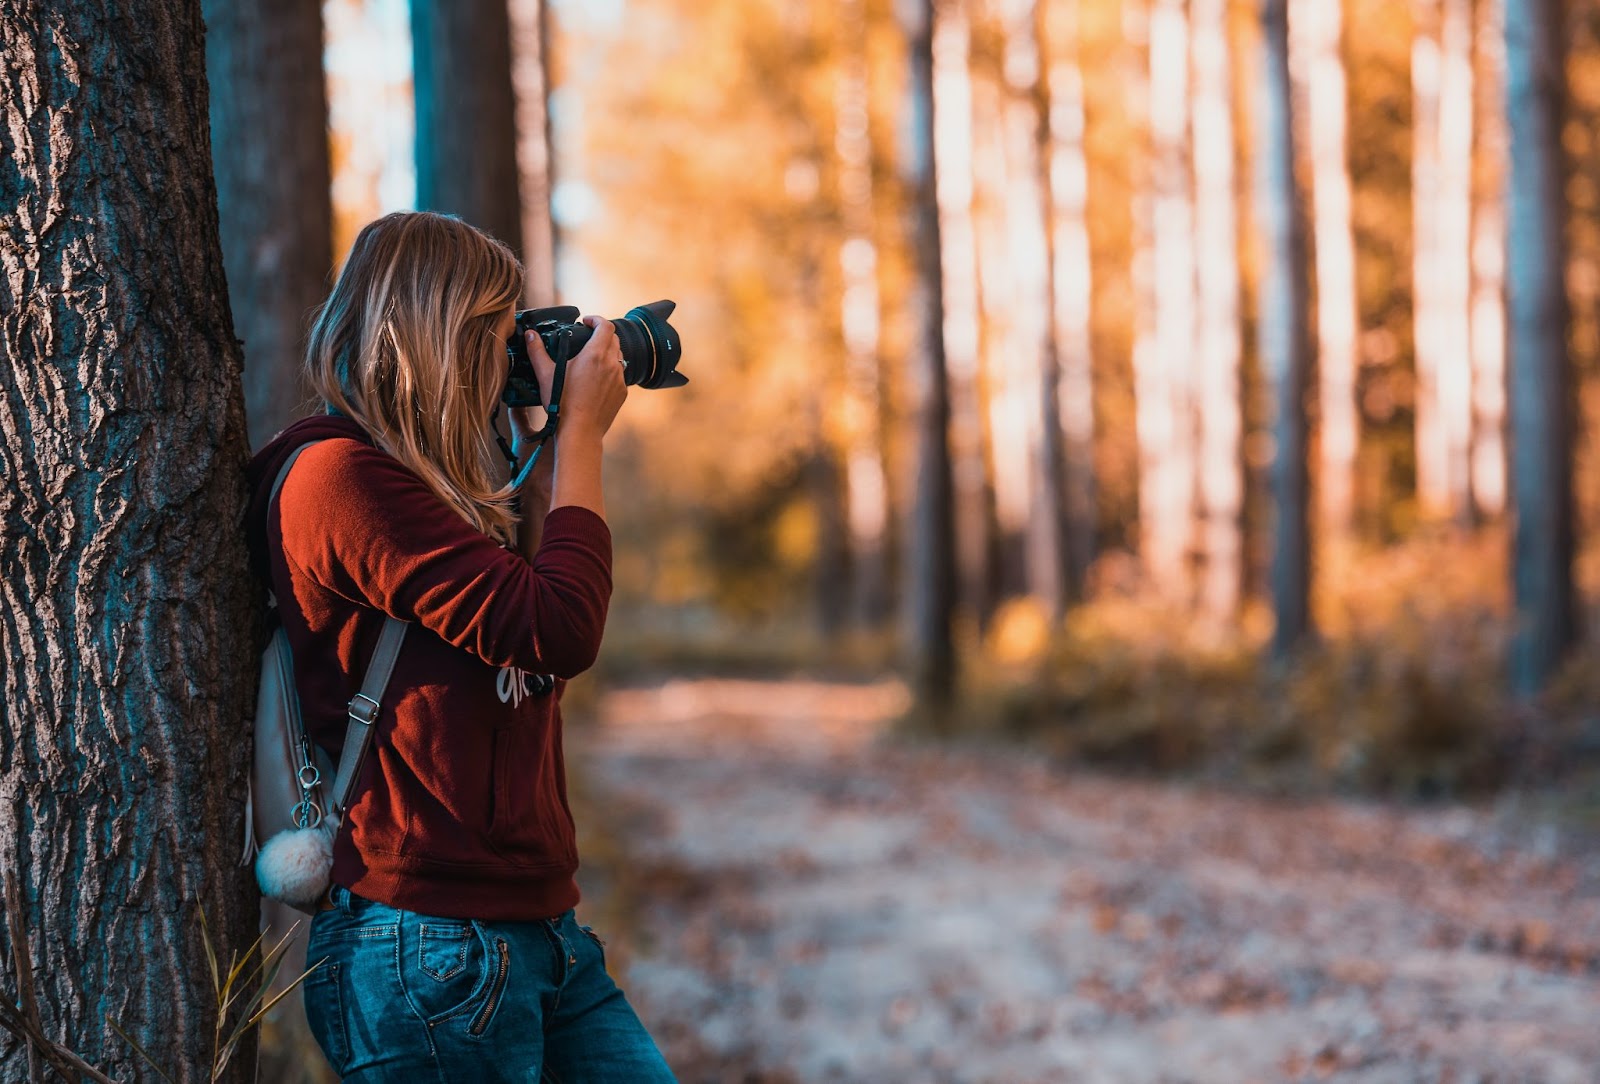 Woman in red taking photos with her camera in a forest